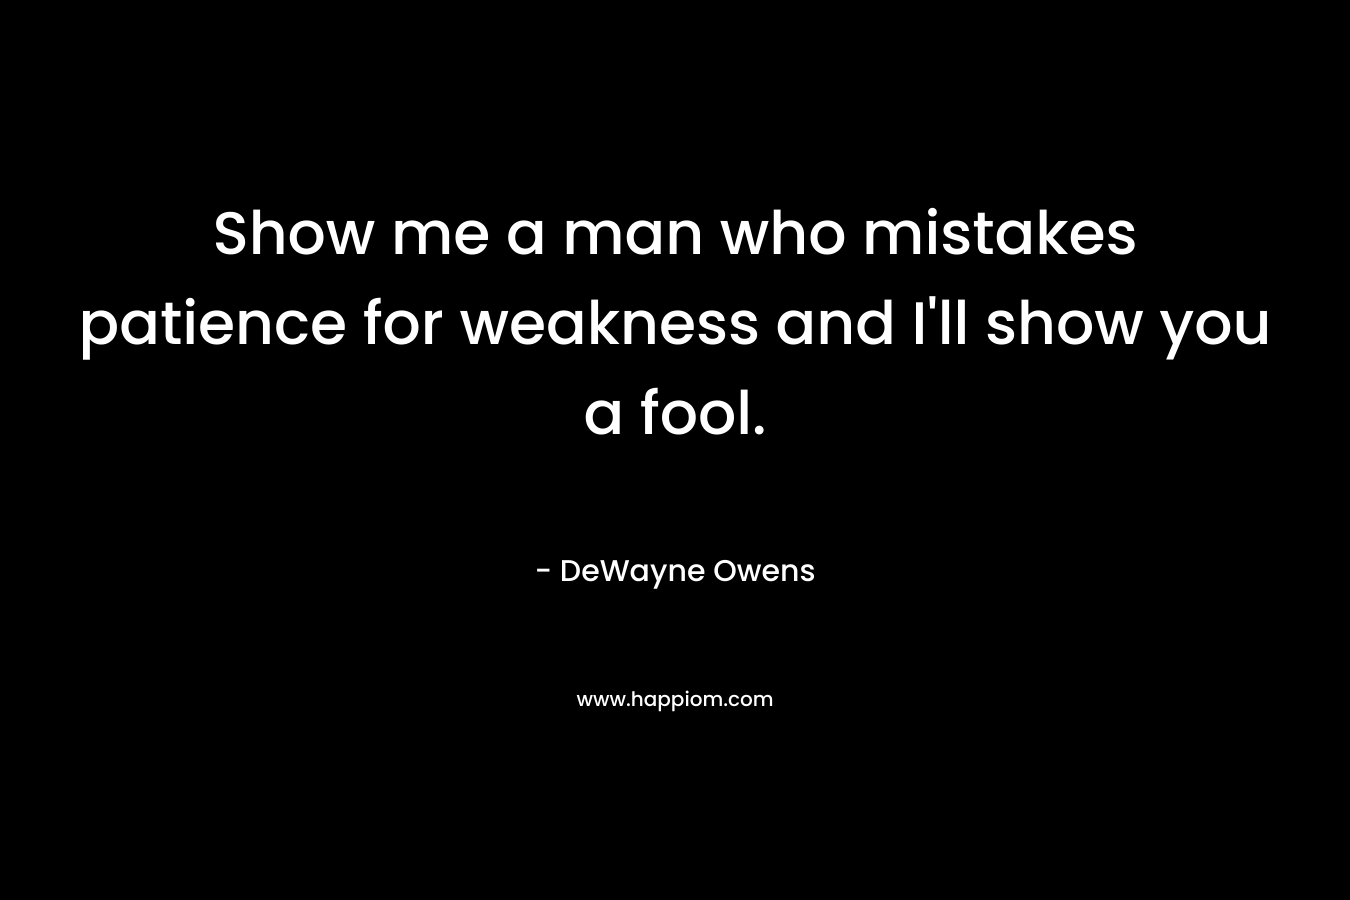 Show me a man who mistakes patience for weakness and I'll show you a fool.